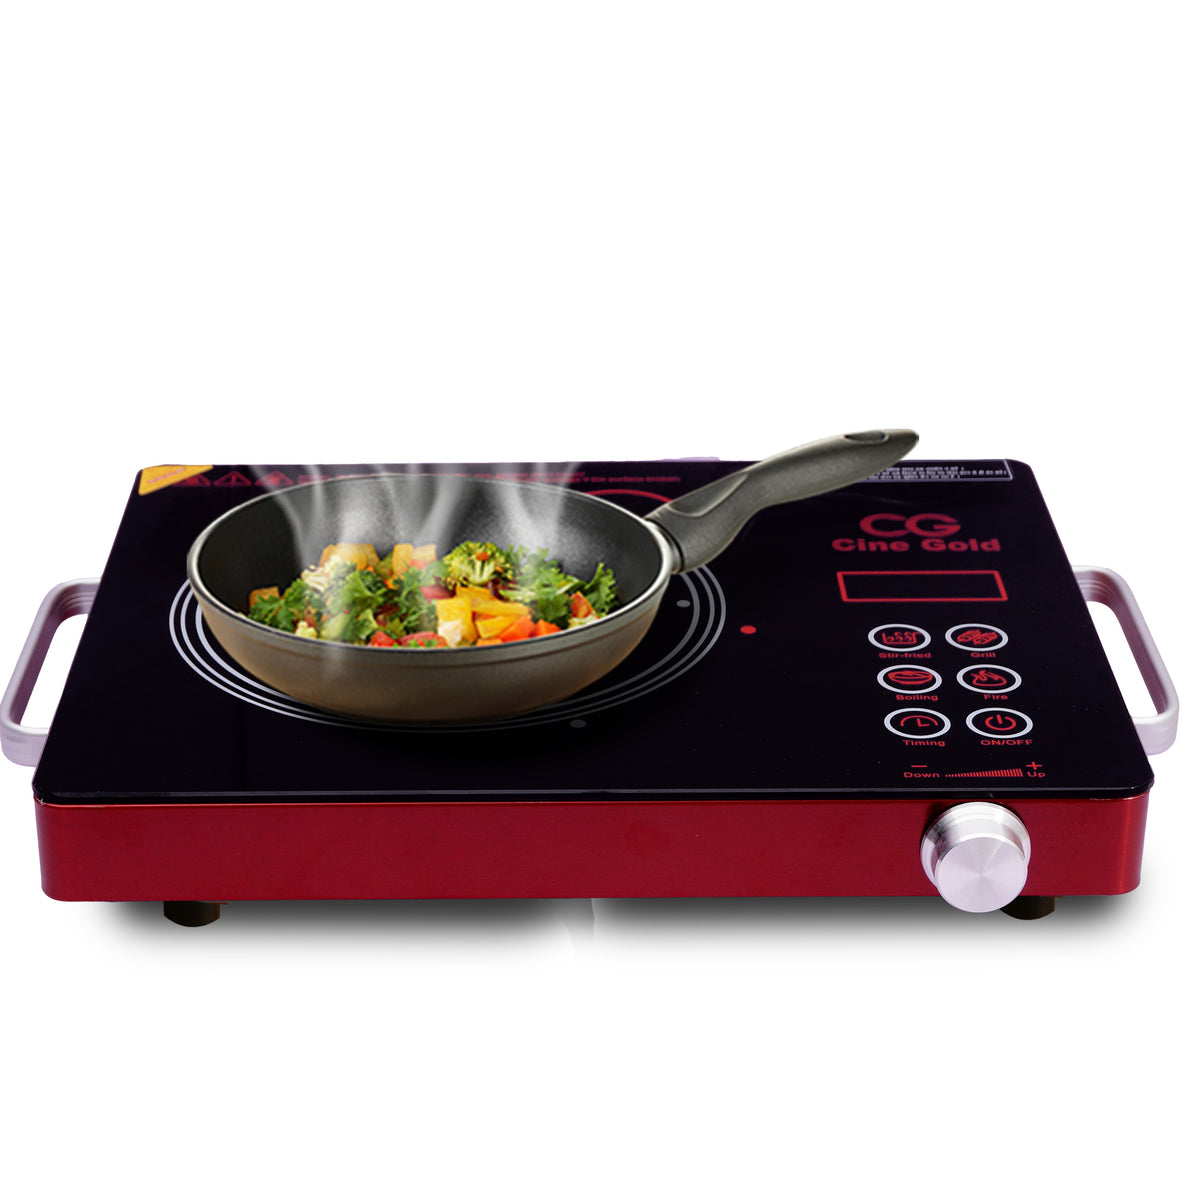 Cine Gold 2200W Multifunction Infra Cooktop: Modern Cooking Convenience with Toughened Glass Touch Panel Display - Compatible with All Utensils, 1-Year Warranty Included (Red)